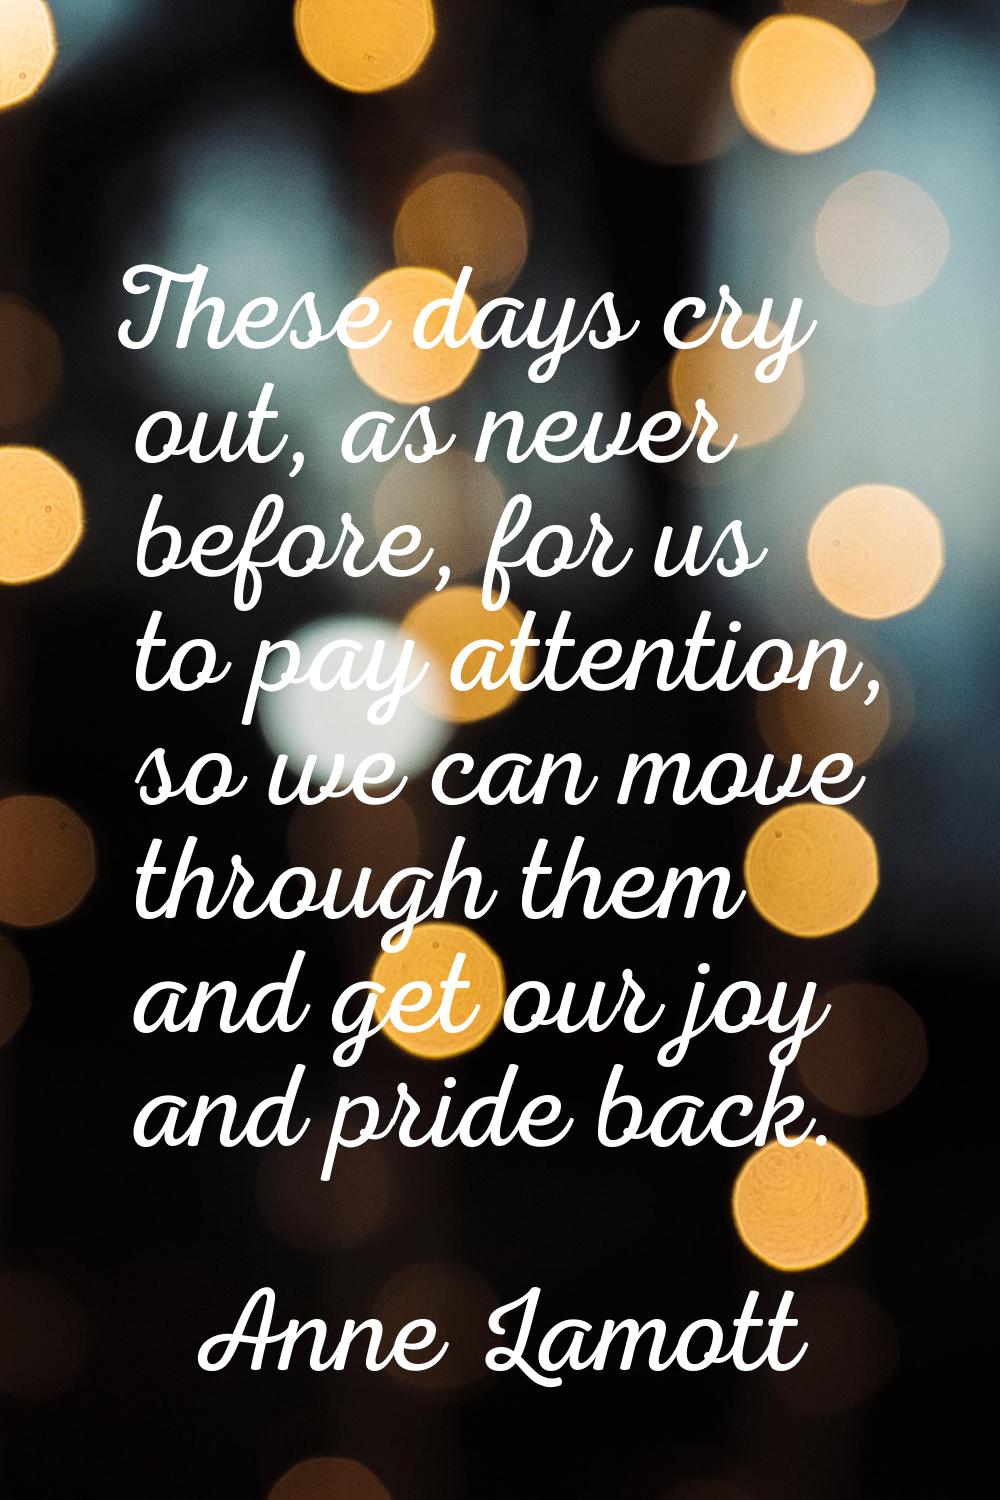 These days cry out, as never before, for us to pay attention, so we can move through them and get o